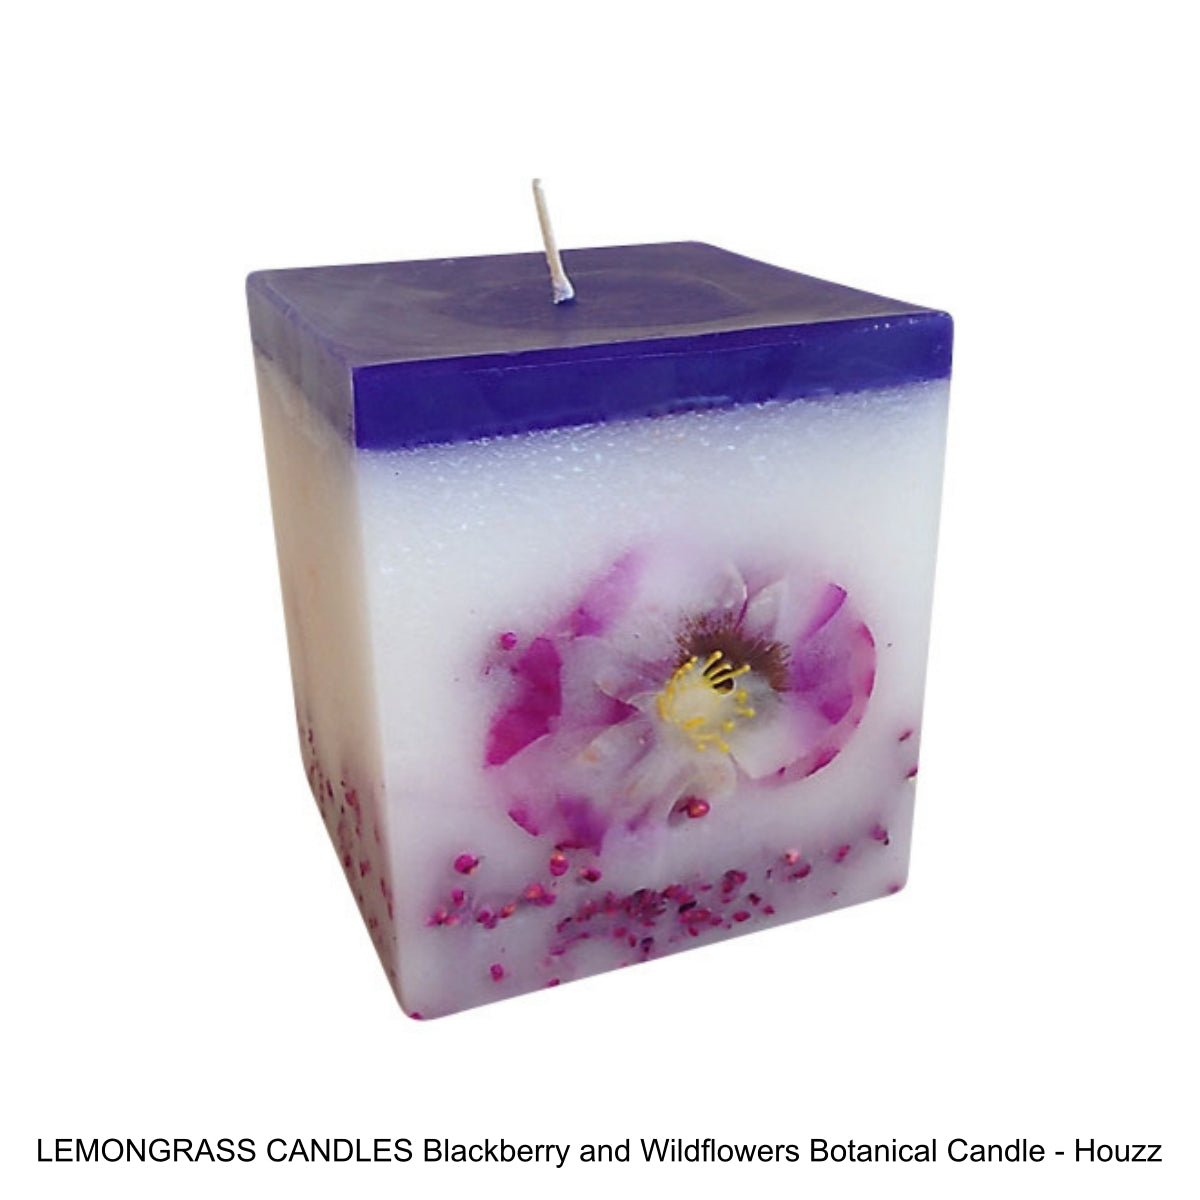 Color Craze: Colorful Candles Can Light The Way – JulRe Designs Studio